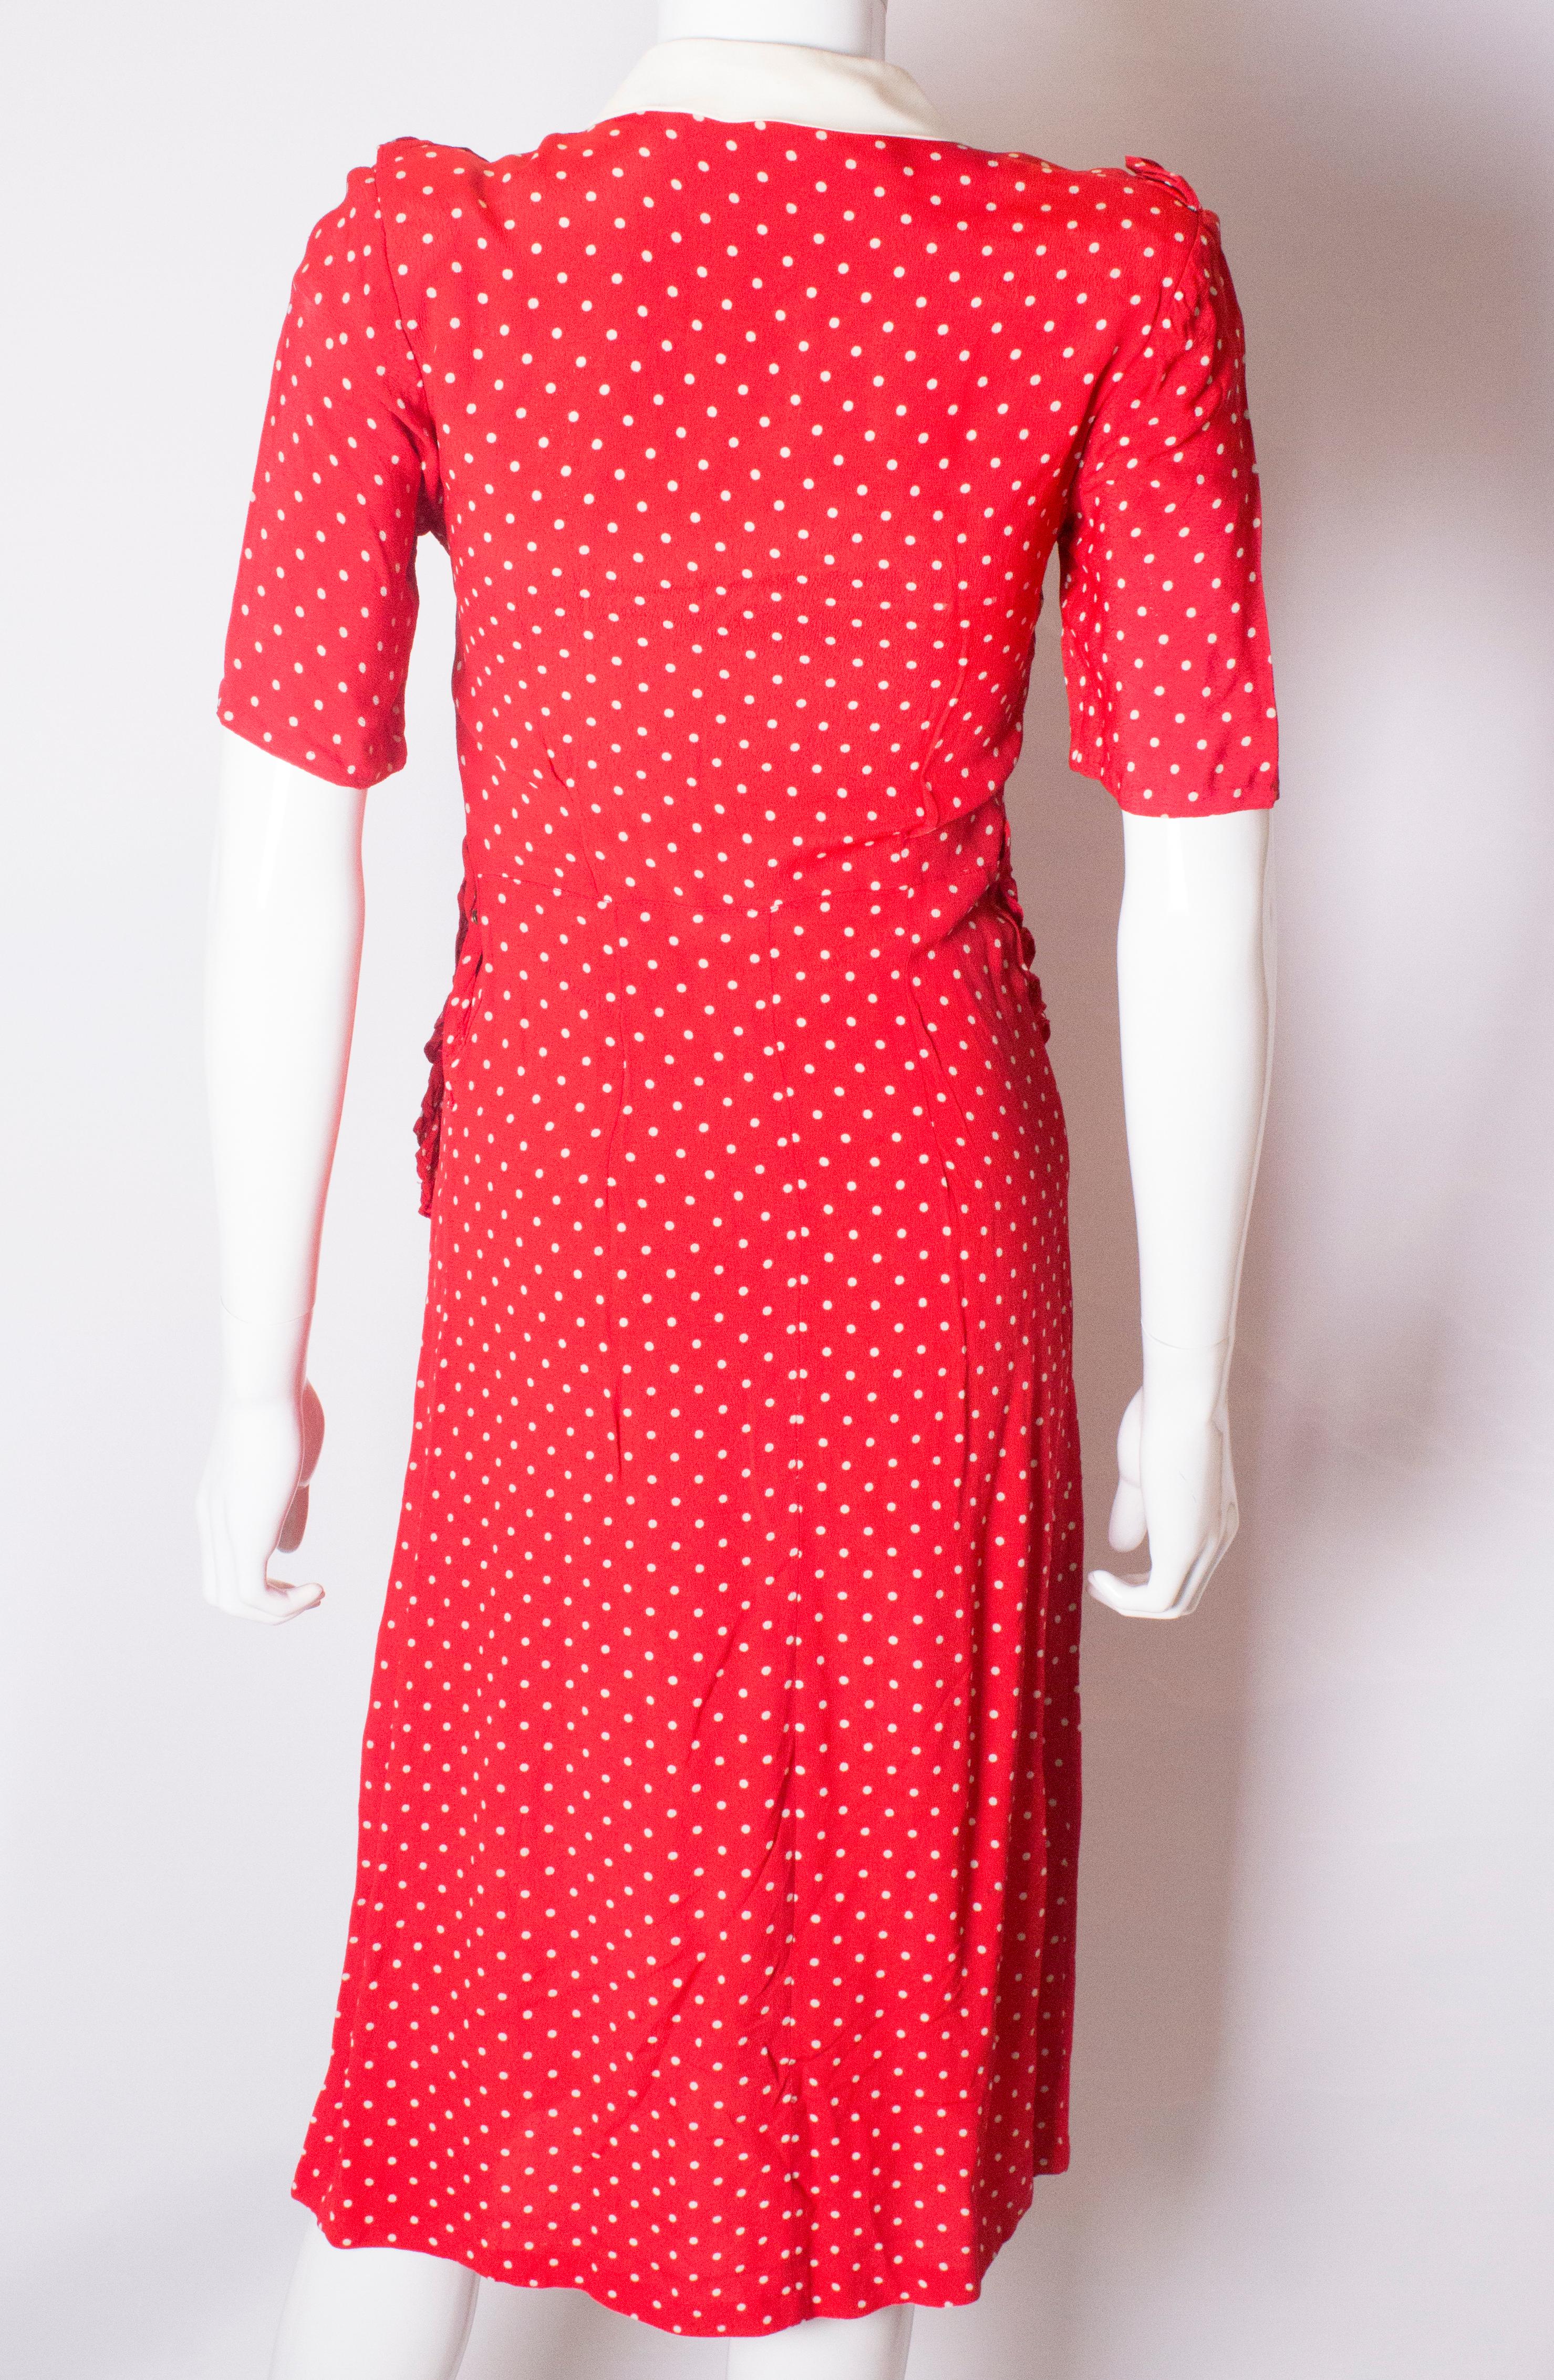 Vintage 1940s Red Polka Dot Dress with Frill Trim 1